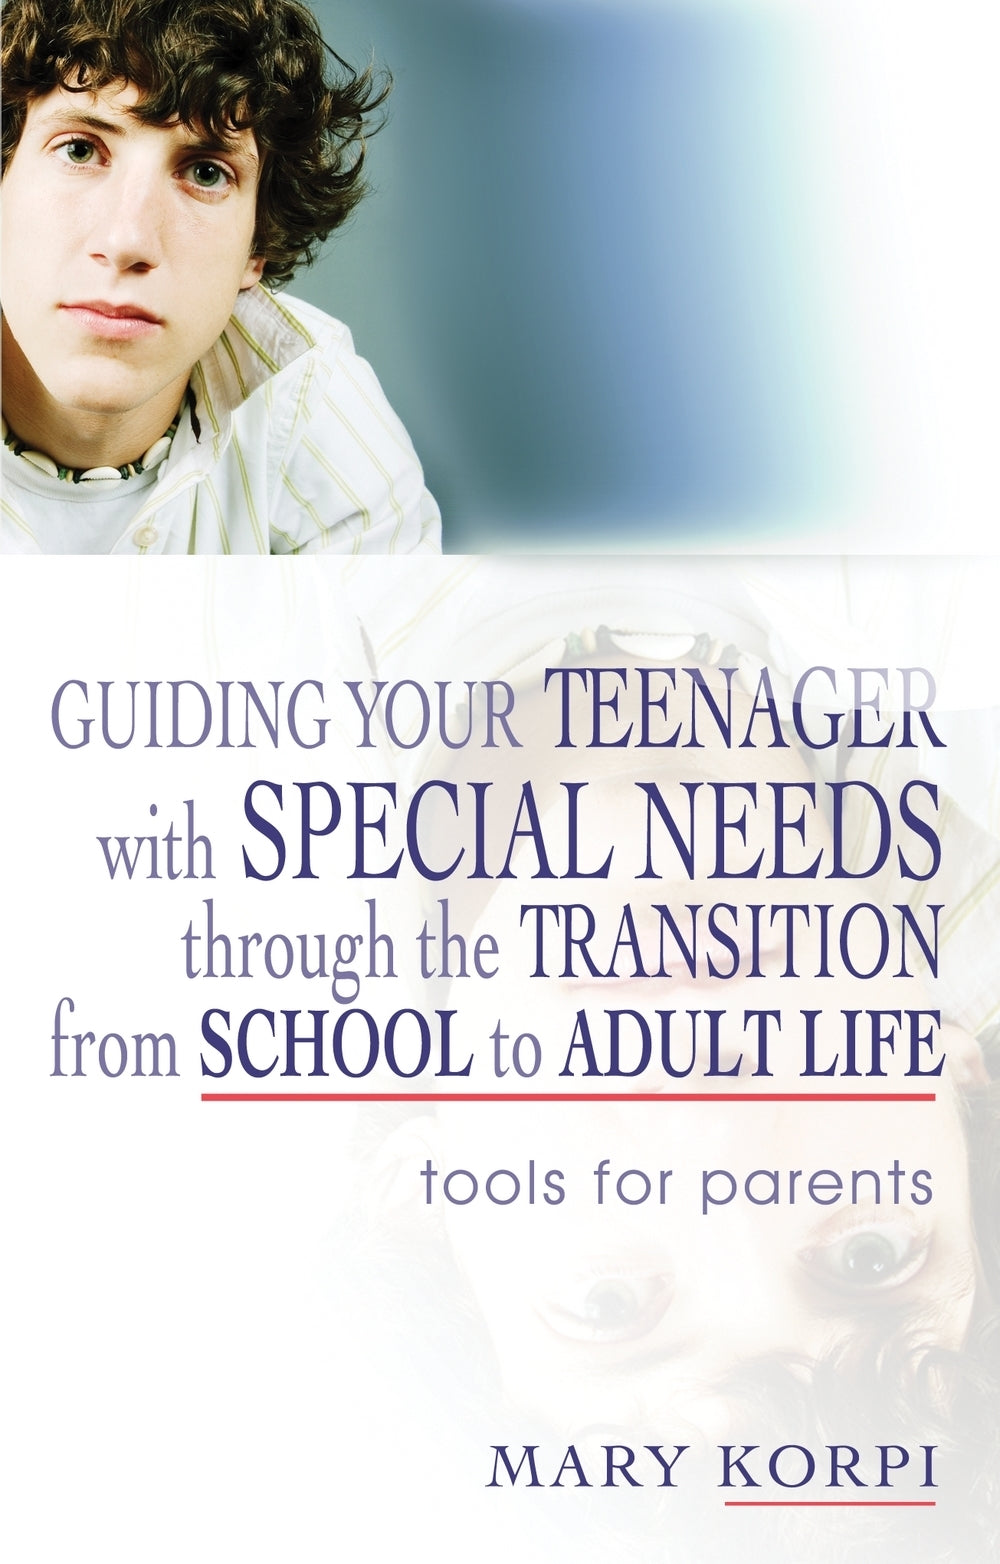 Guiding Your Teenager with Special Needs through the Transition from School to Adult Life by Mary Korpi